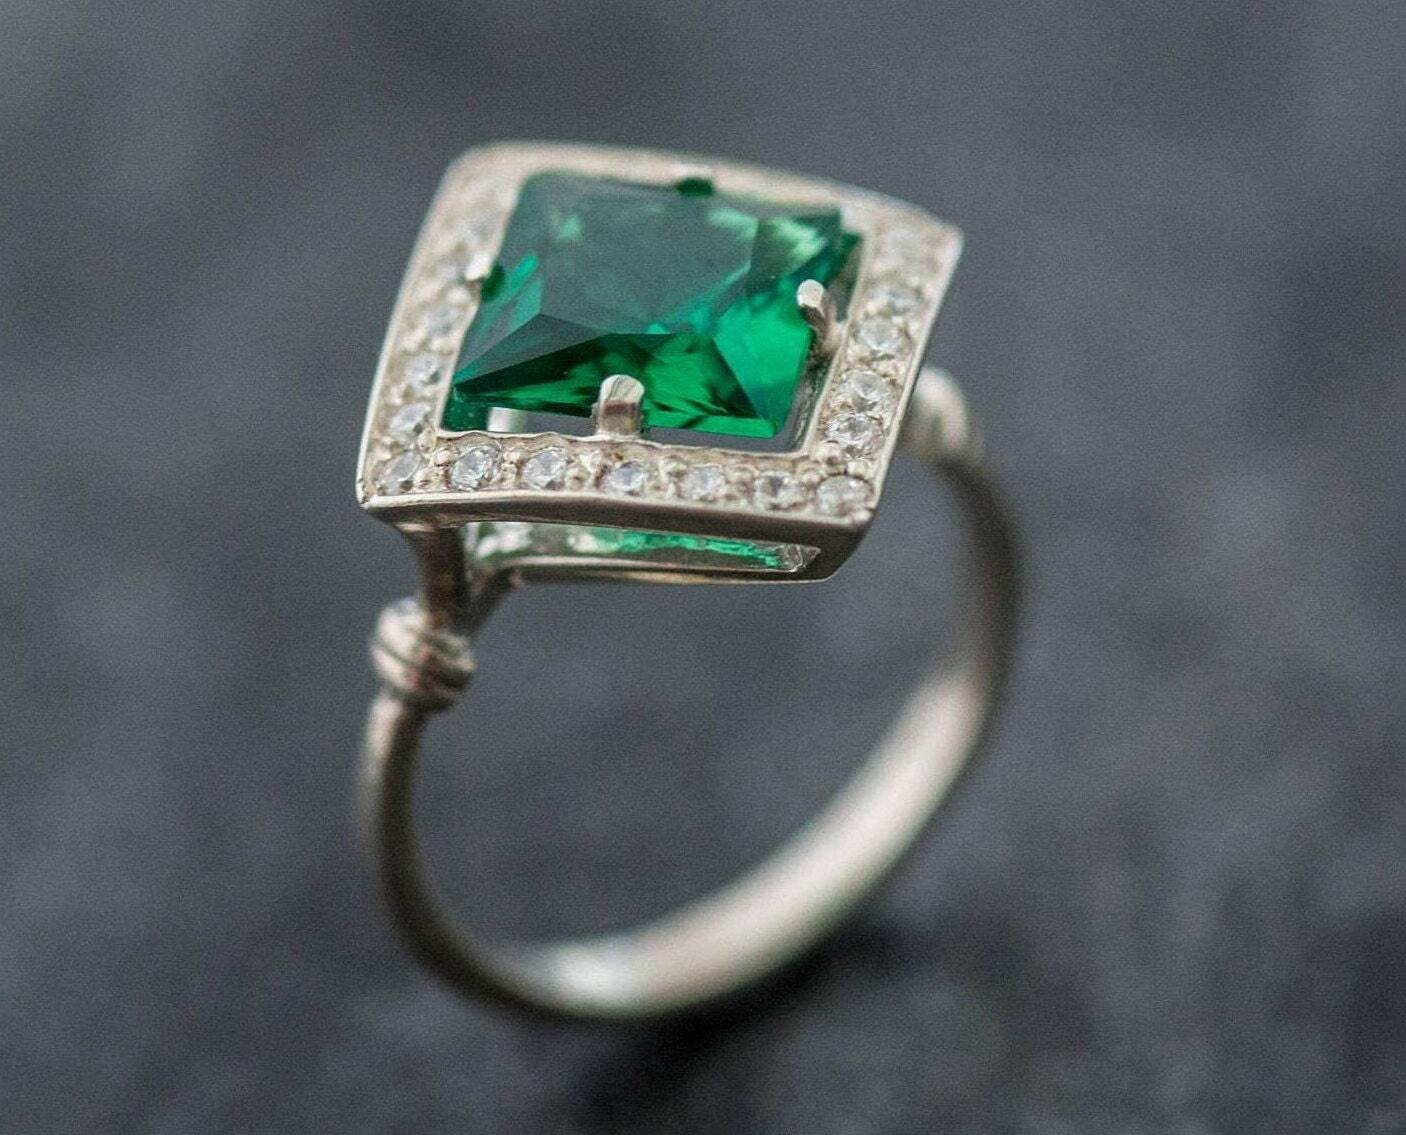 Antique Emerald Ring - Emerald Square Ring - Green Gemstone Ring